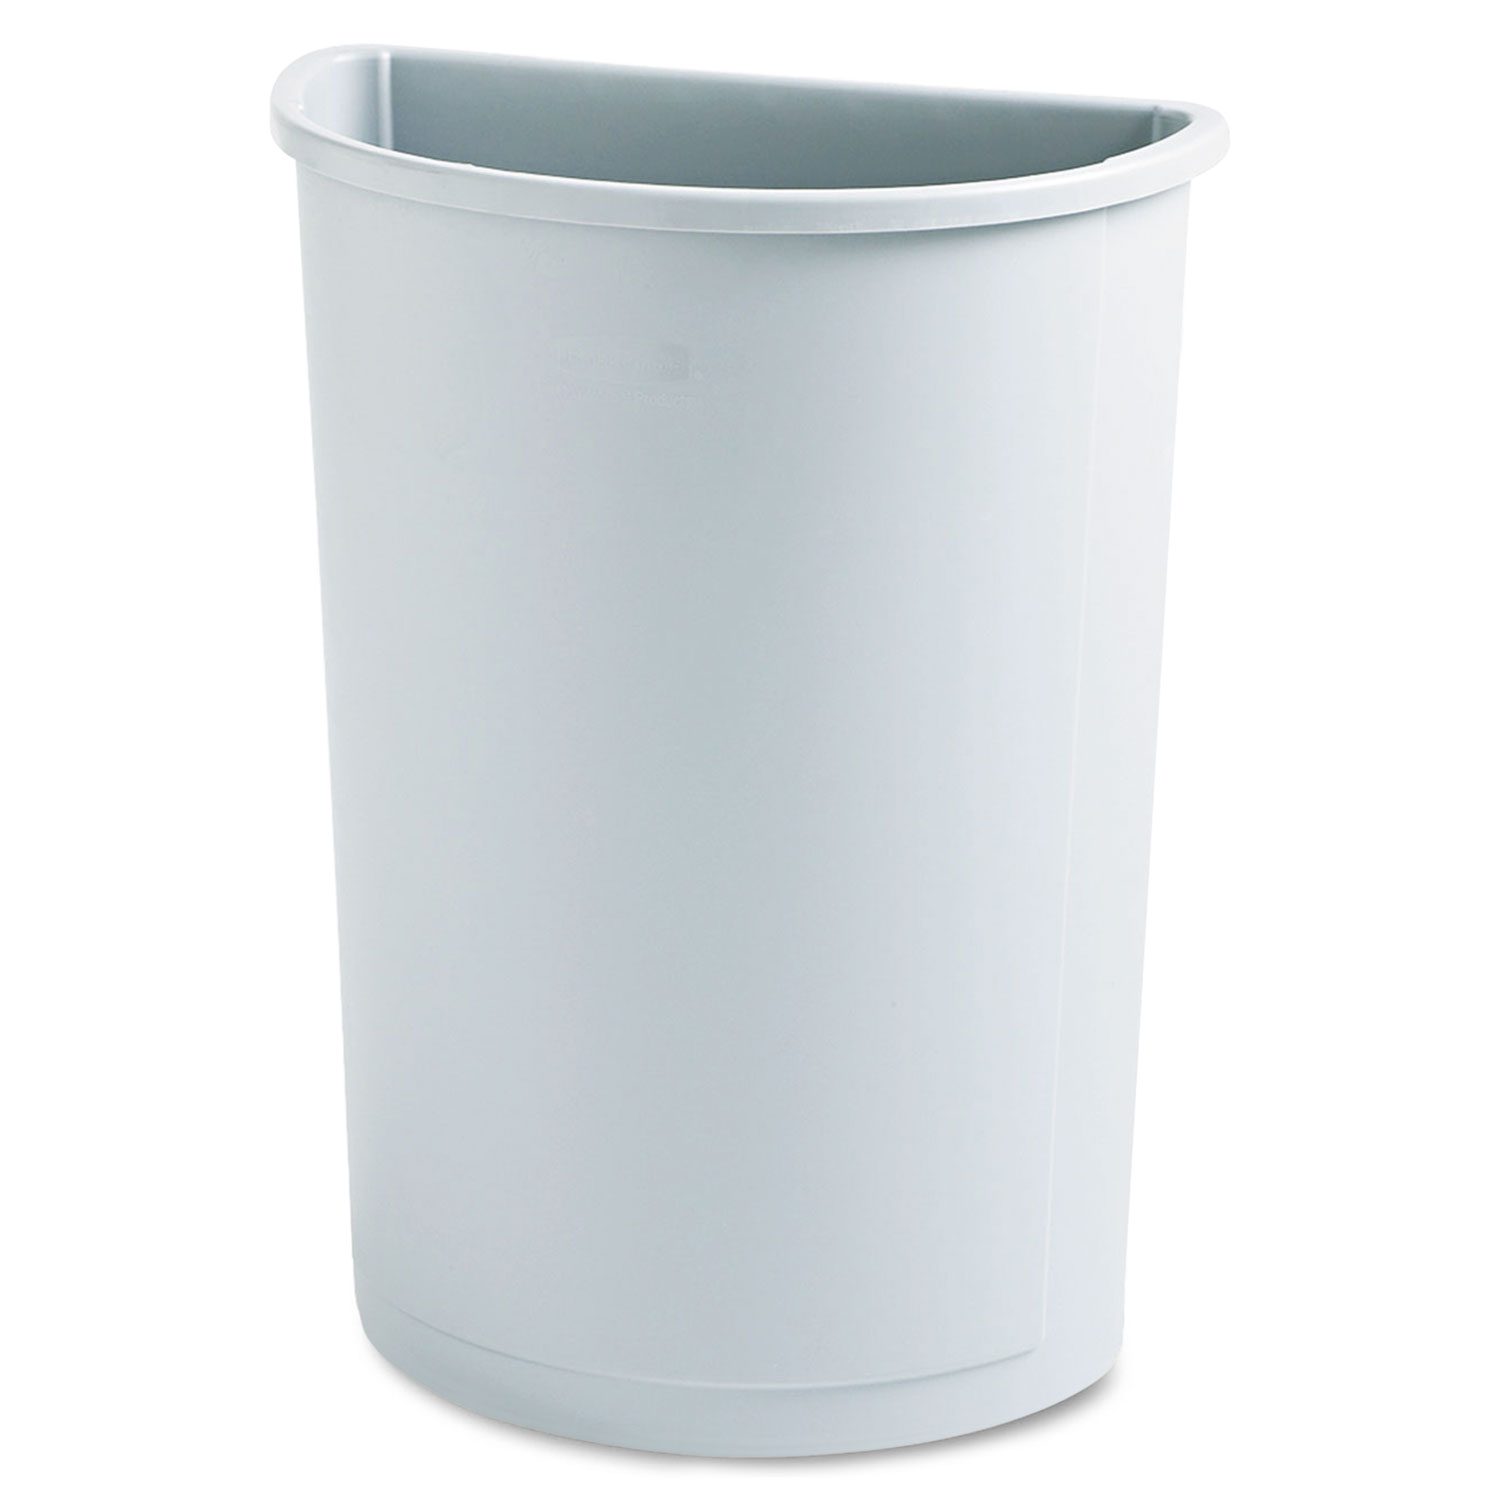 Rubbermaid RCP352000GY Commercial Untouchable Waste Container, Half-Round, Plastic, 21gal, Gray